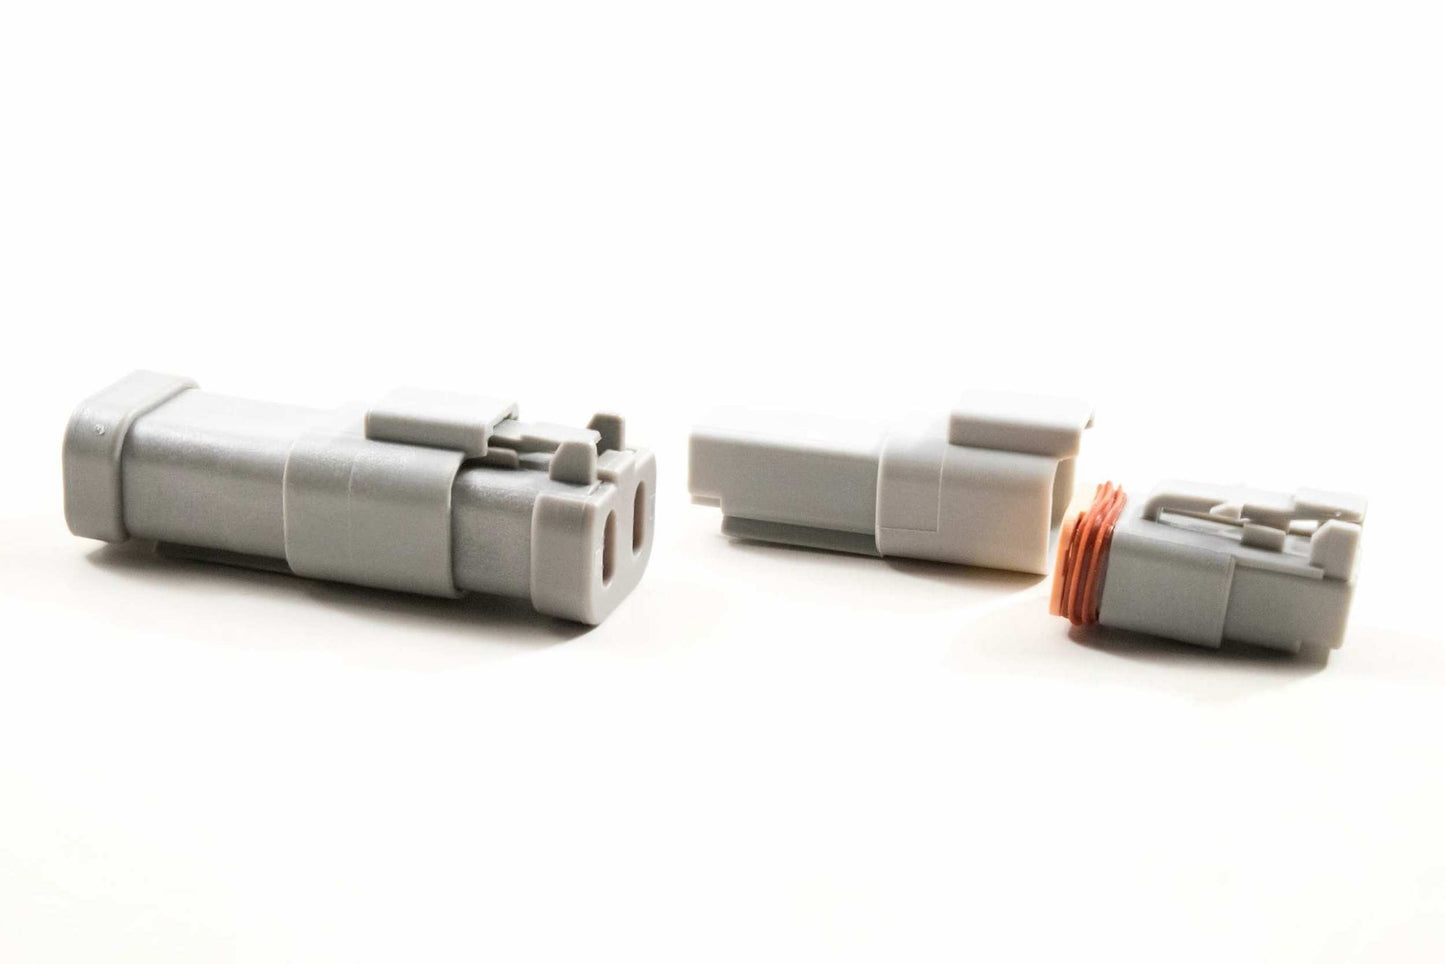 Connector: DT Male - 2 pin